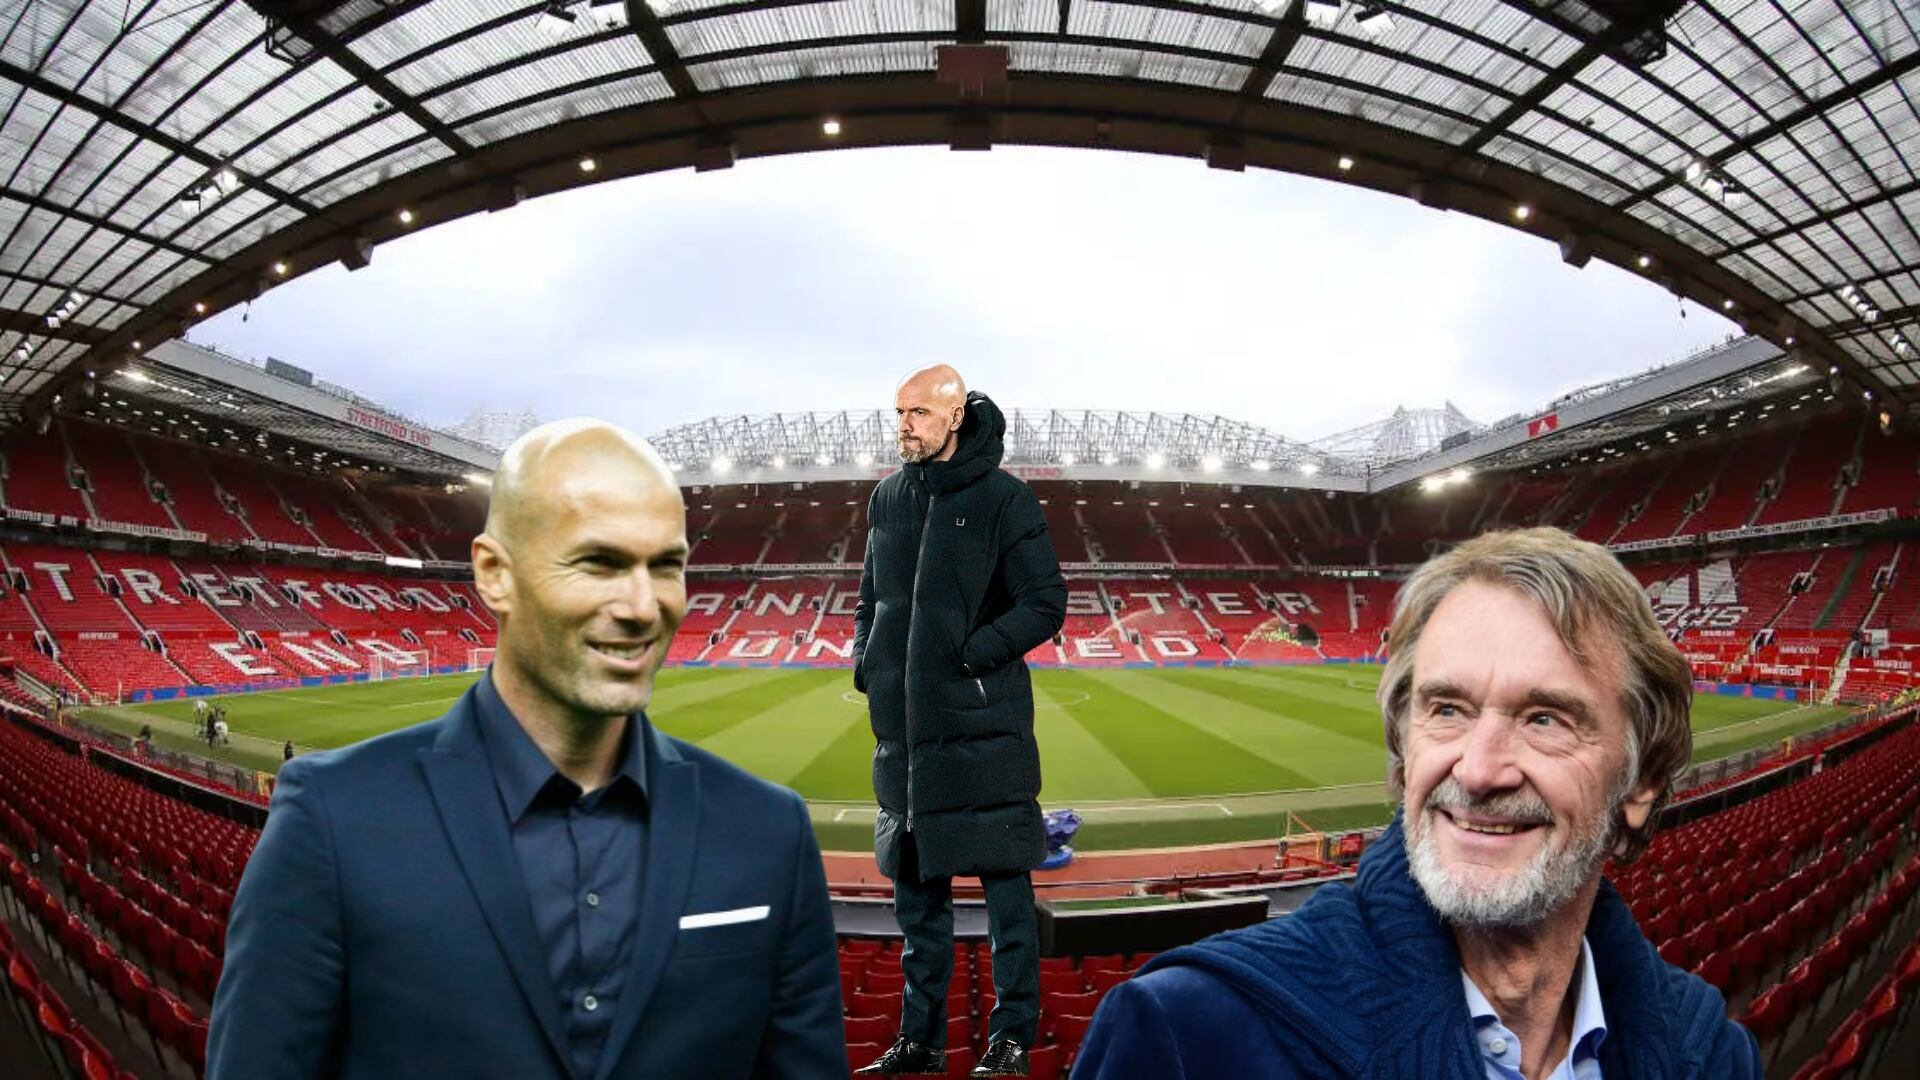 While Man Utd fans want Zidane, Ten Hag wishes to stay; this is what the Red Devils's co-owner said about the situation